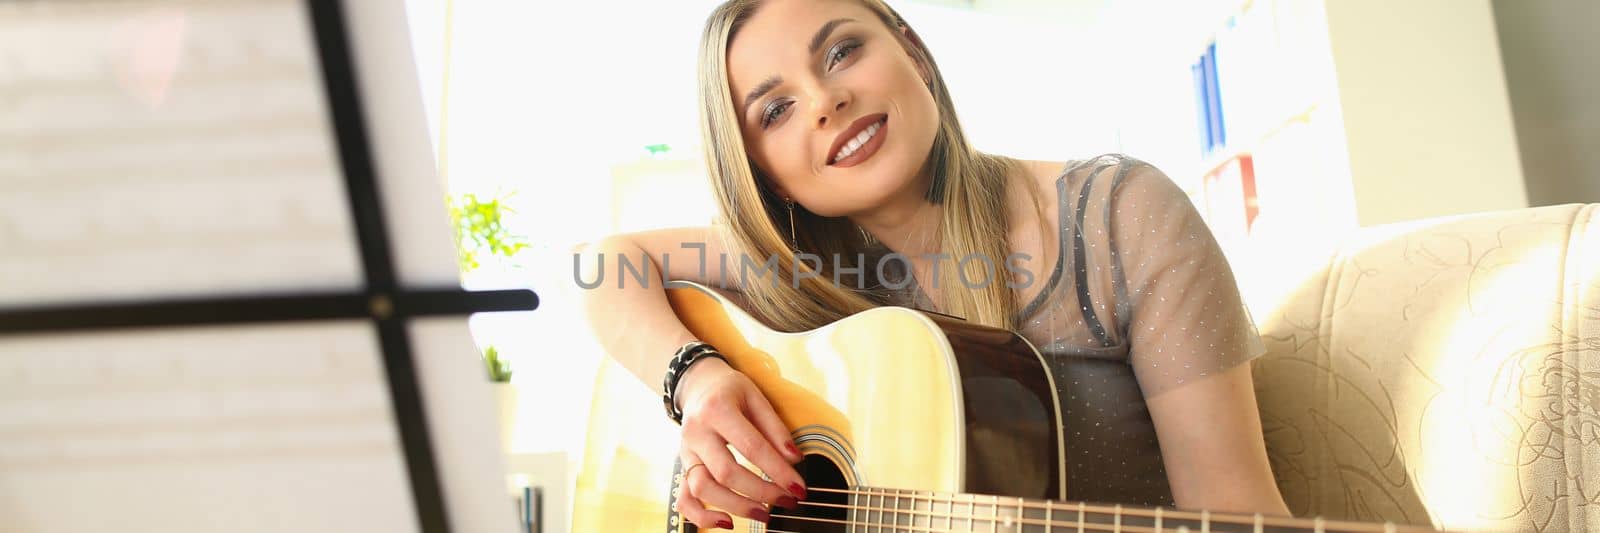 Smiling blond woman playing guitar and looking through notes. Talented musician and music hobby concept